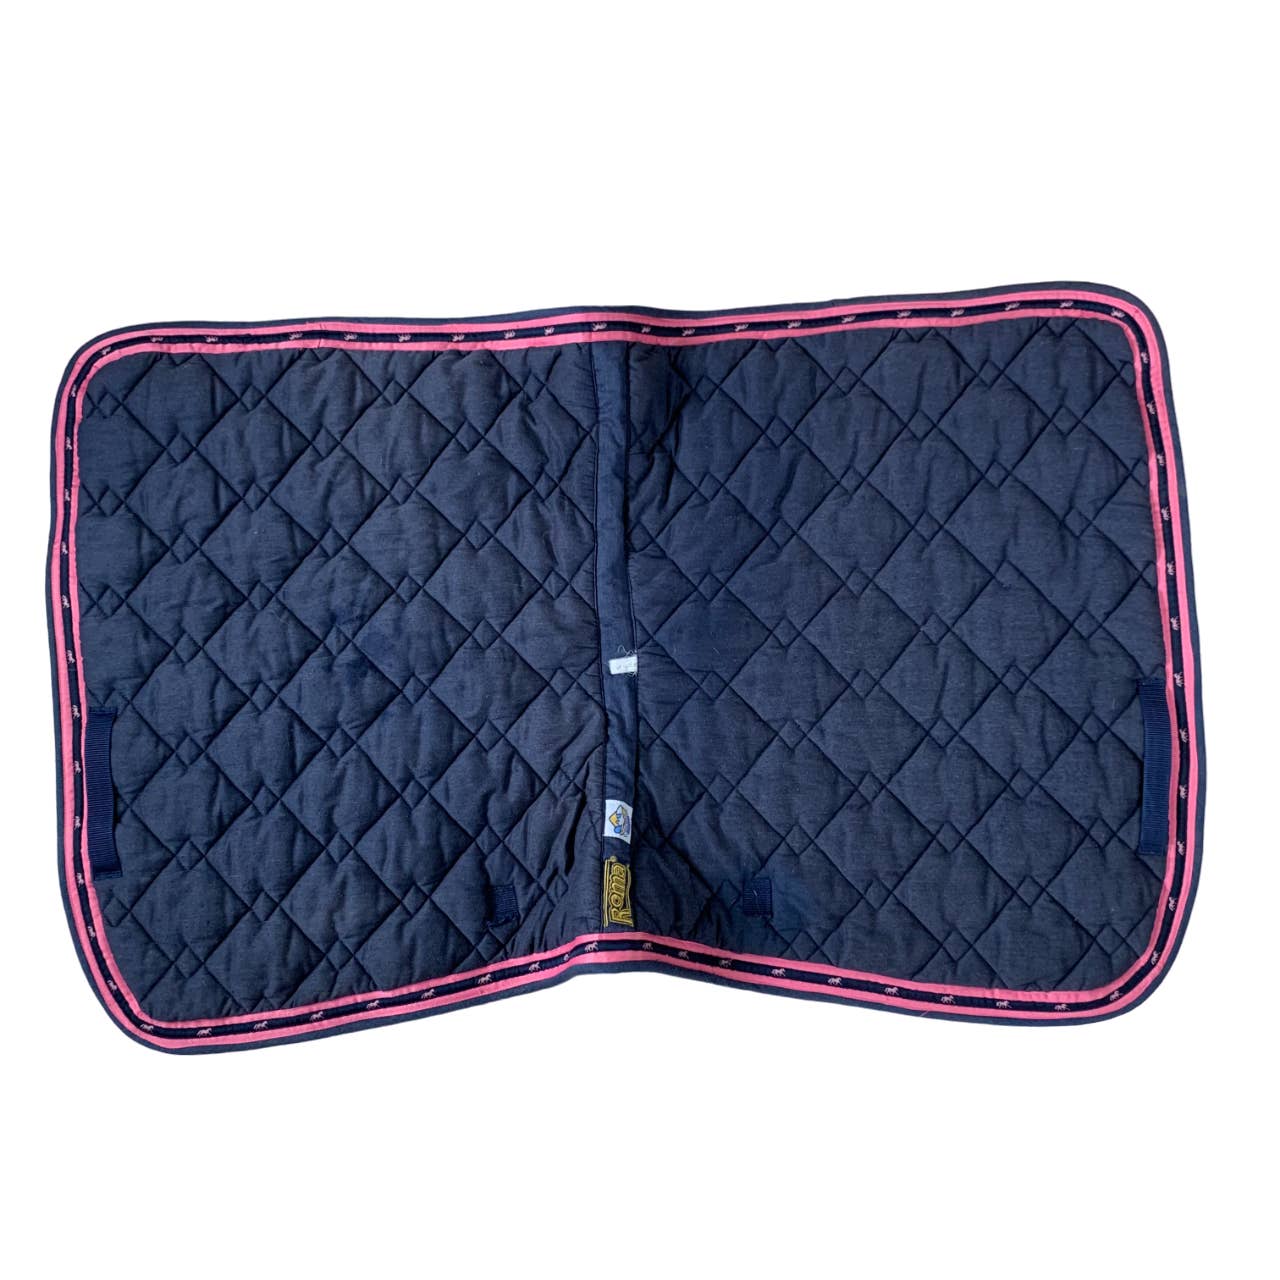 Roma All Purpose Saddle Pad in Navy - Full